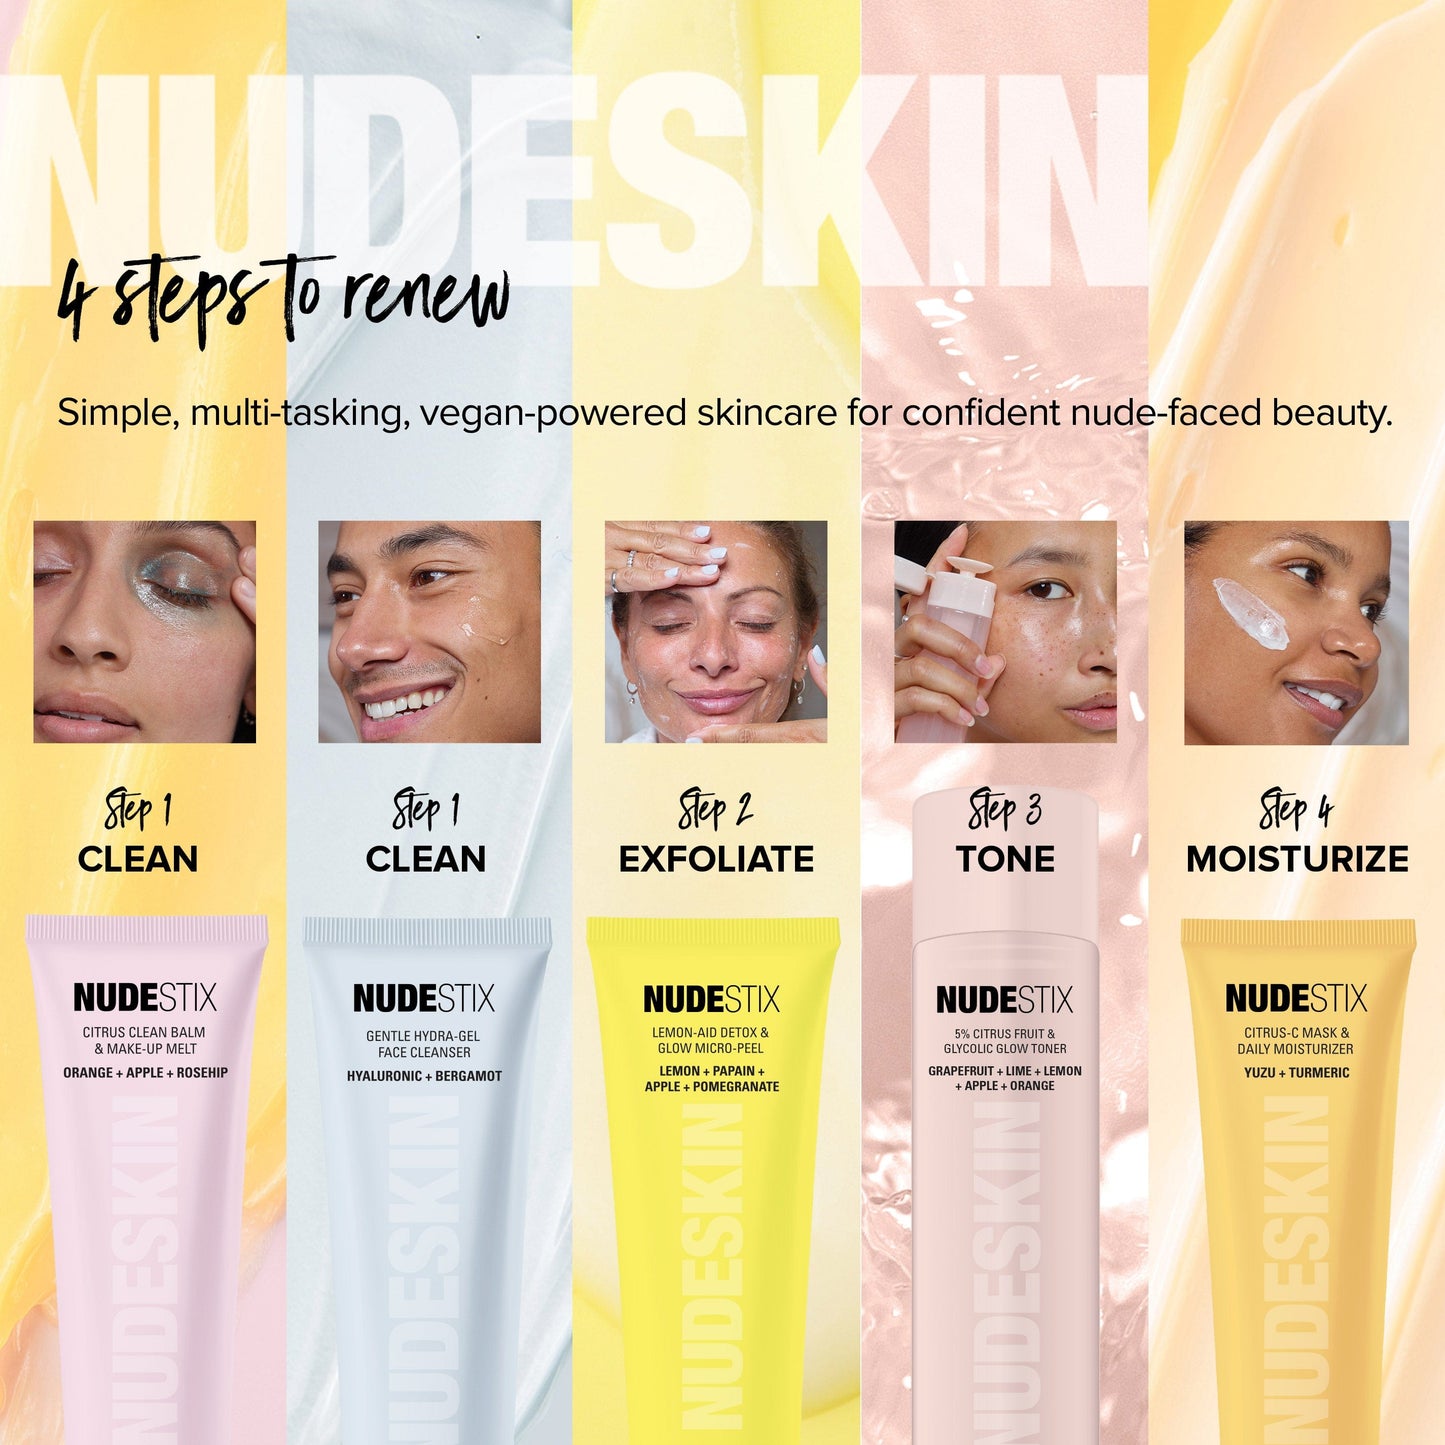 Nudeskin step 4: LEMON-AID DETOX & GLOW MICRO-PEEL and other products